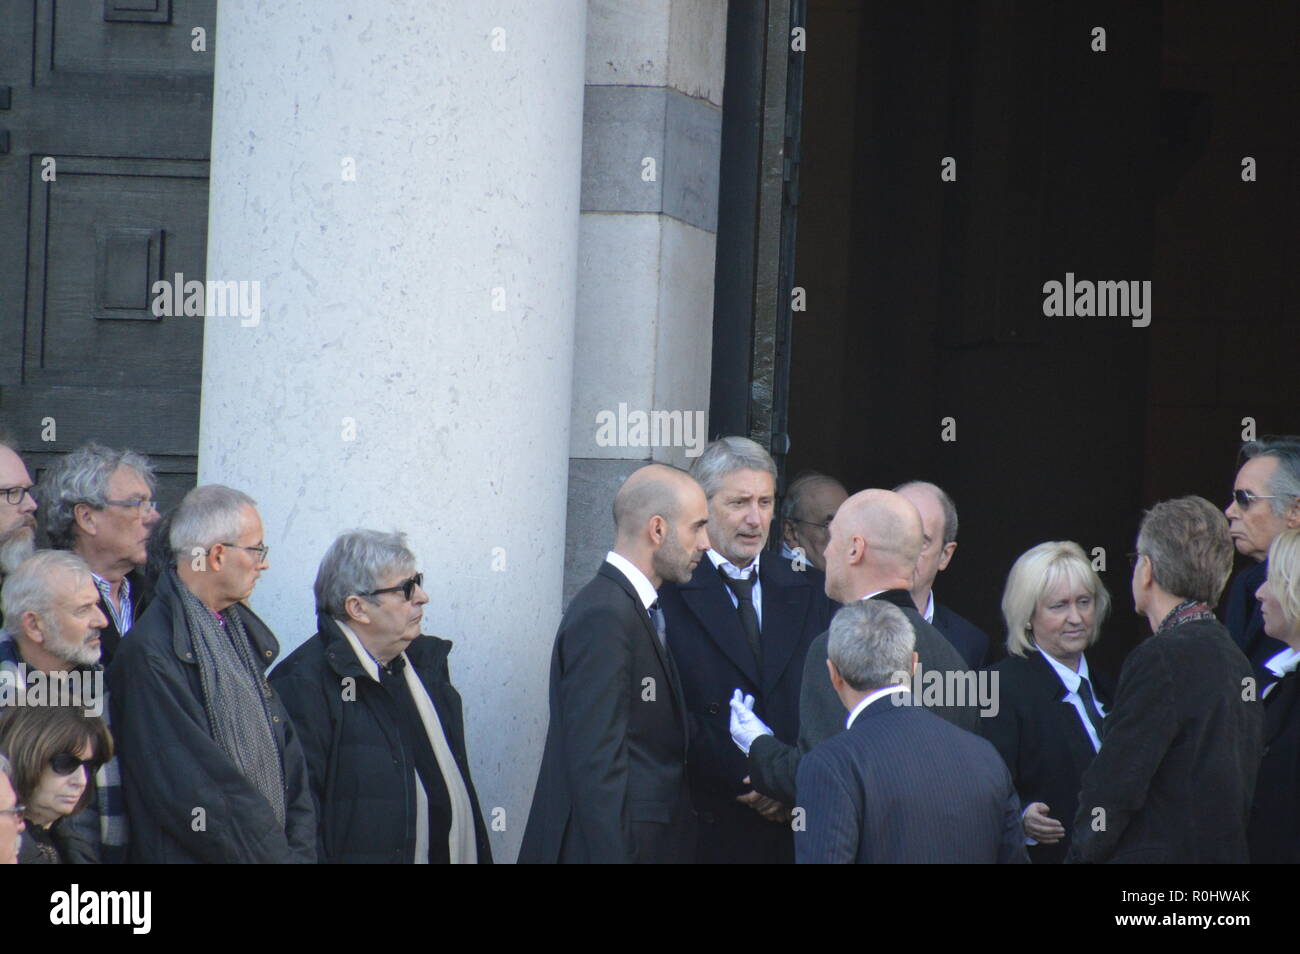 Paris, France. 5th Nov 2018. (Antoine de Caunes French TV animator;(center of the image).French celebrities attend the ceremony for the death of Philippe GILDAS, french TV animator. Crematorium of the Cemetery of the Pere Lachaise, Paris, France. 5 november 2018. 13h30.  ALPHACIT NEWIM / Alamy Live News Credit: Alphacit NEWIM/Alamy Live News Stock Photo